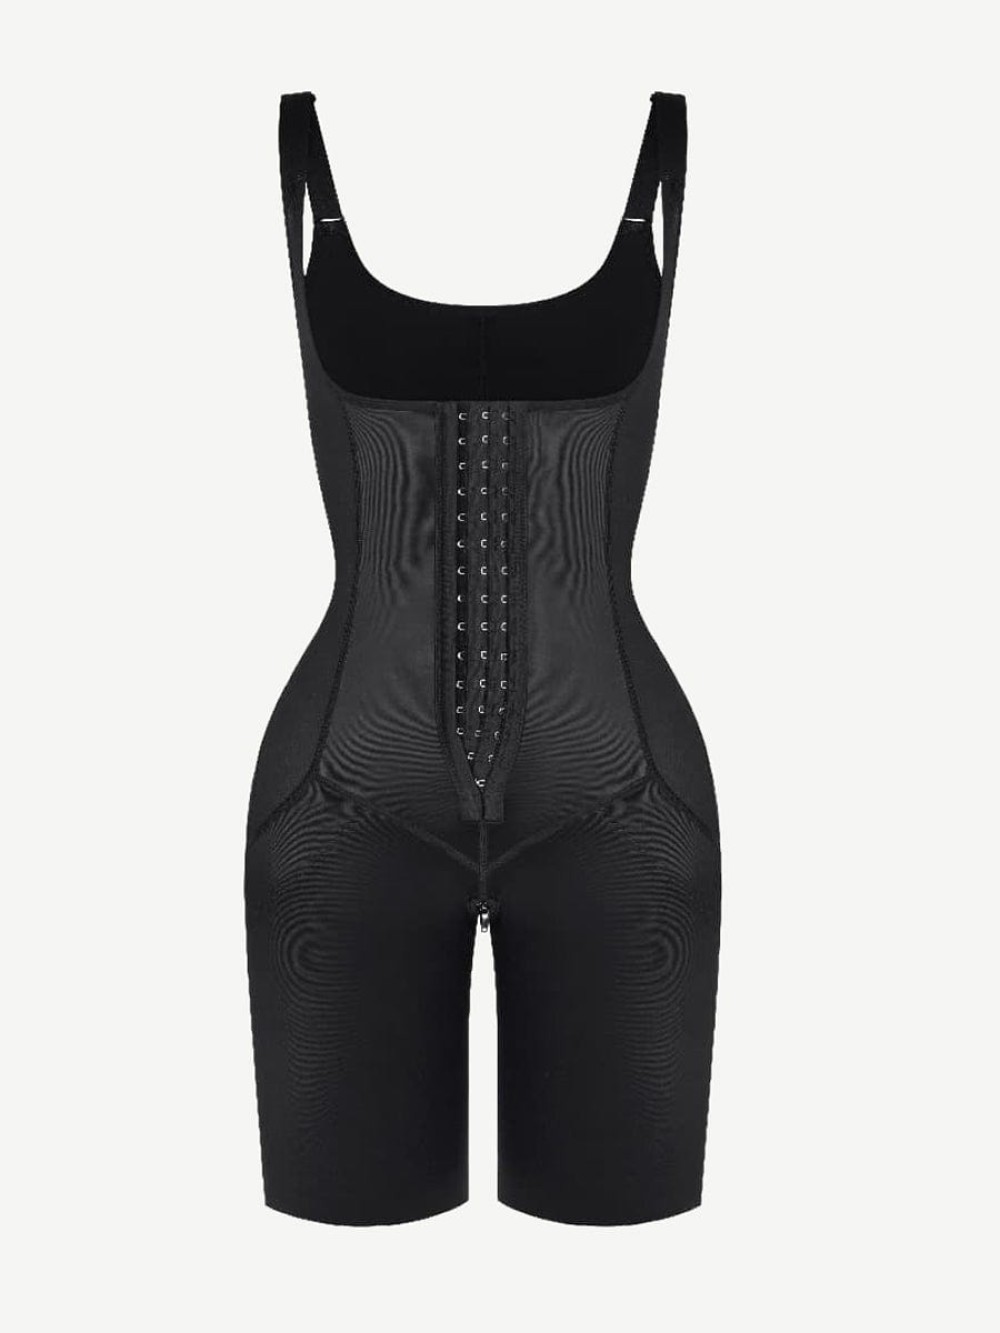 New Fashion After Surgery Chest Support Shapewear Bodysuit